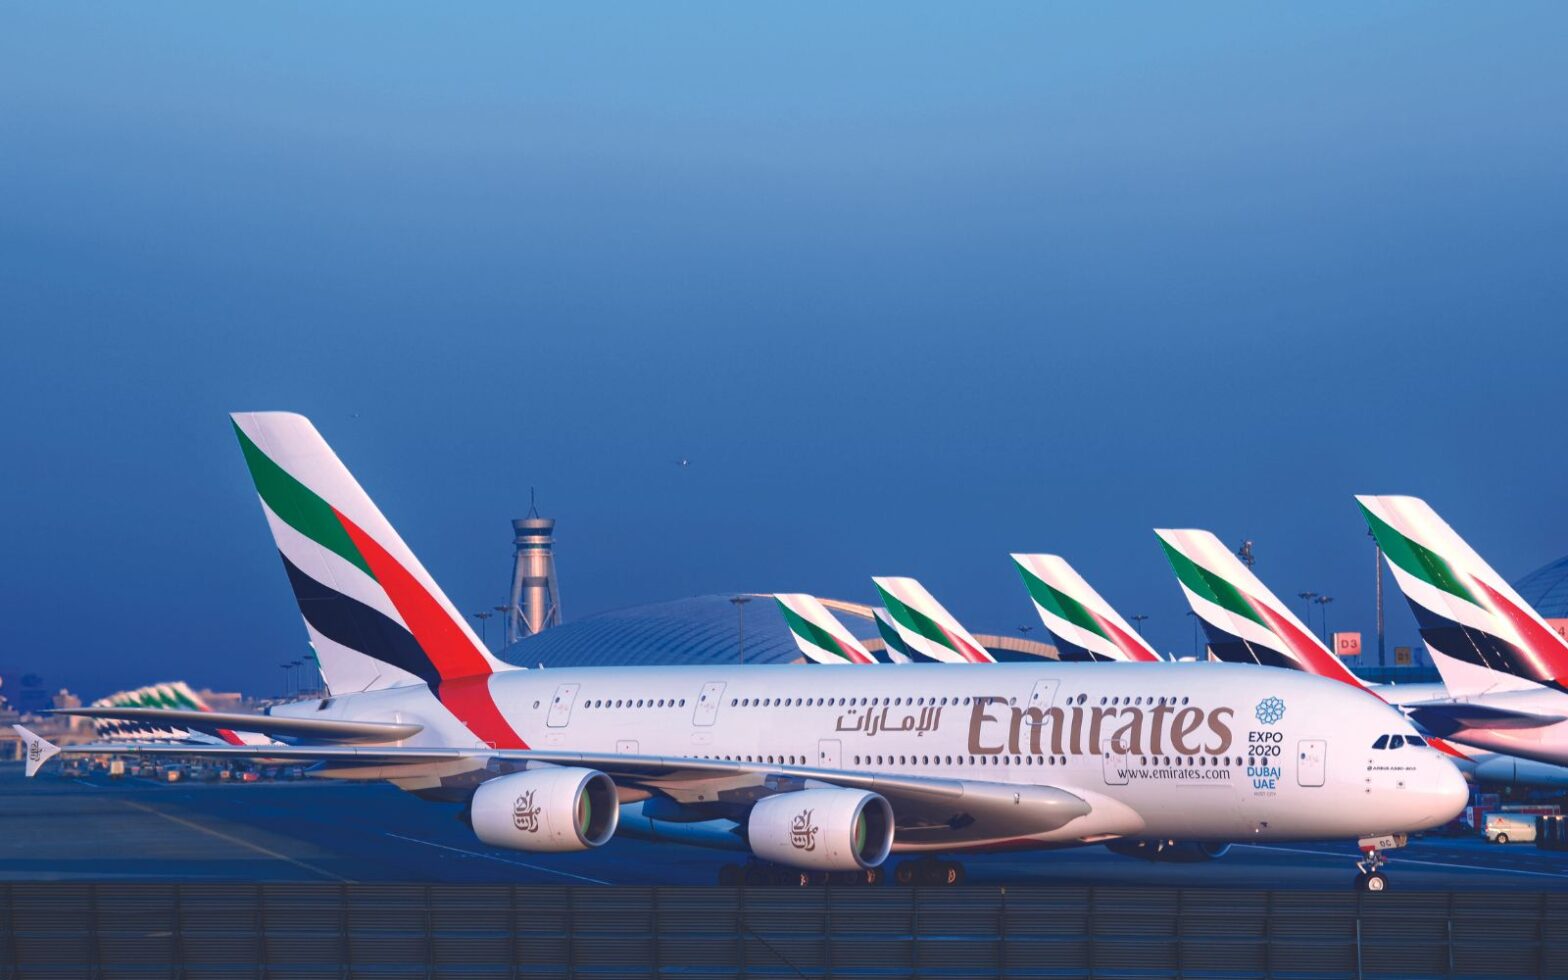 side view of Emirates Aircraft - airline now offers free wifi to all passengers